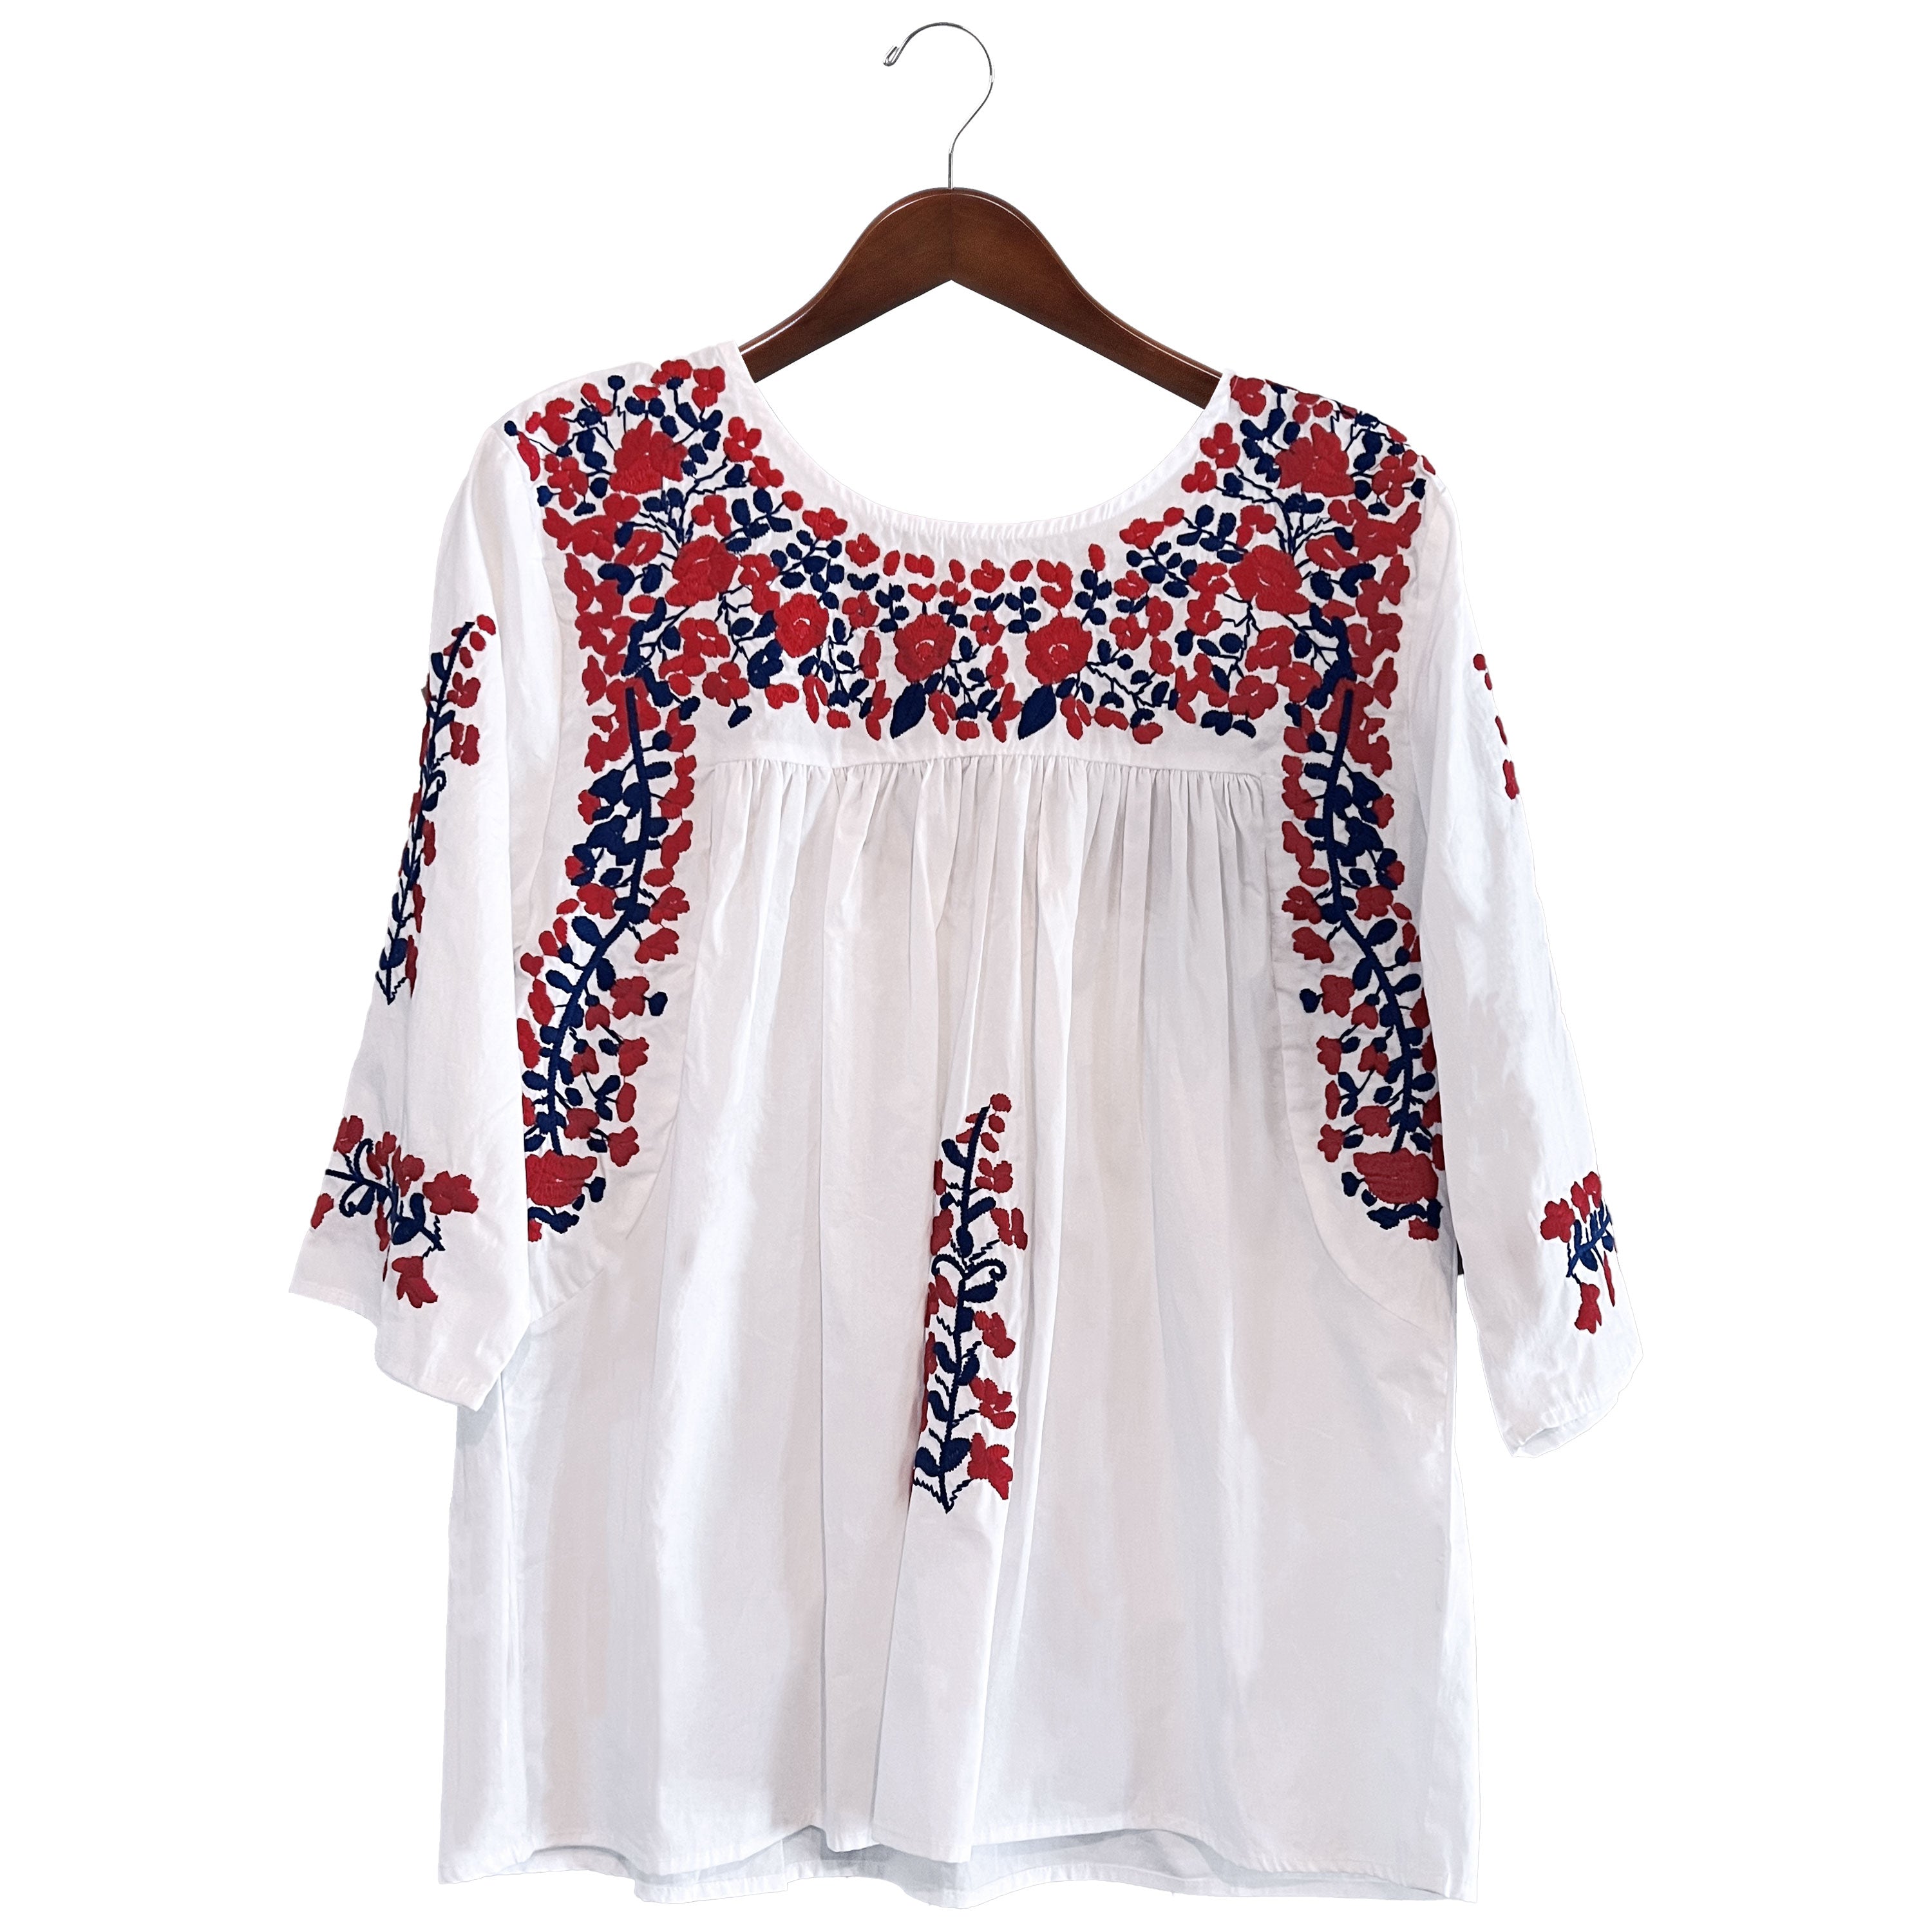 PRE-ORDER: Fourth of July White Saturday Blouse (shipping first week of June)